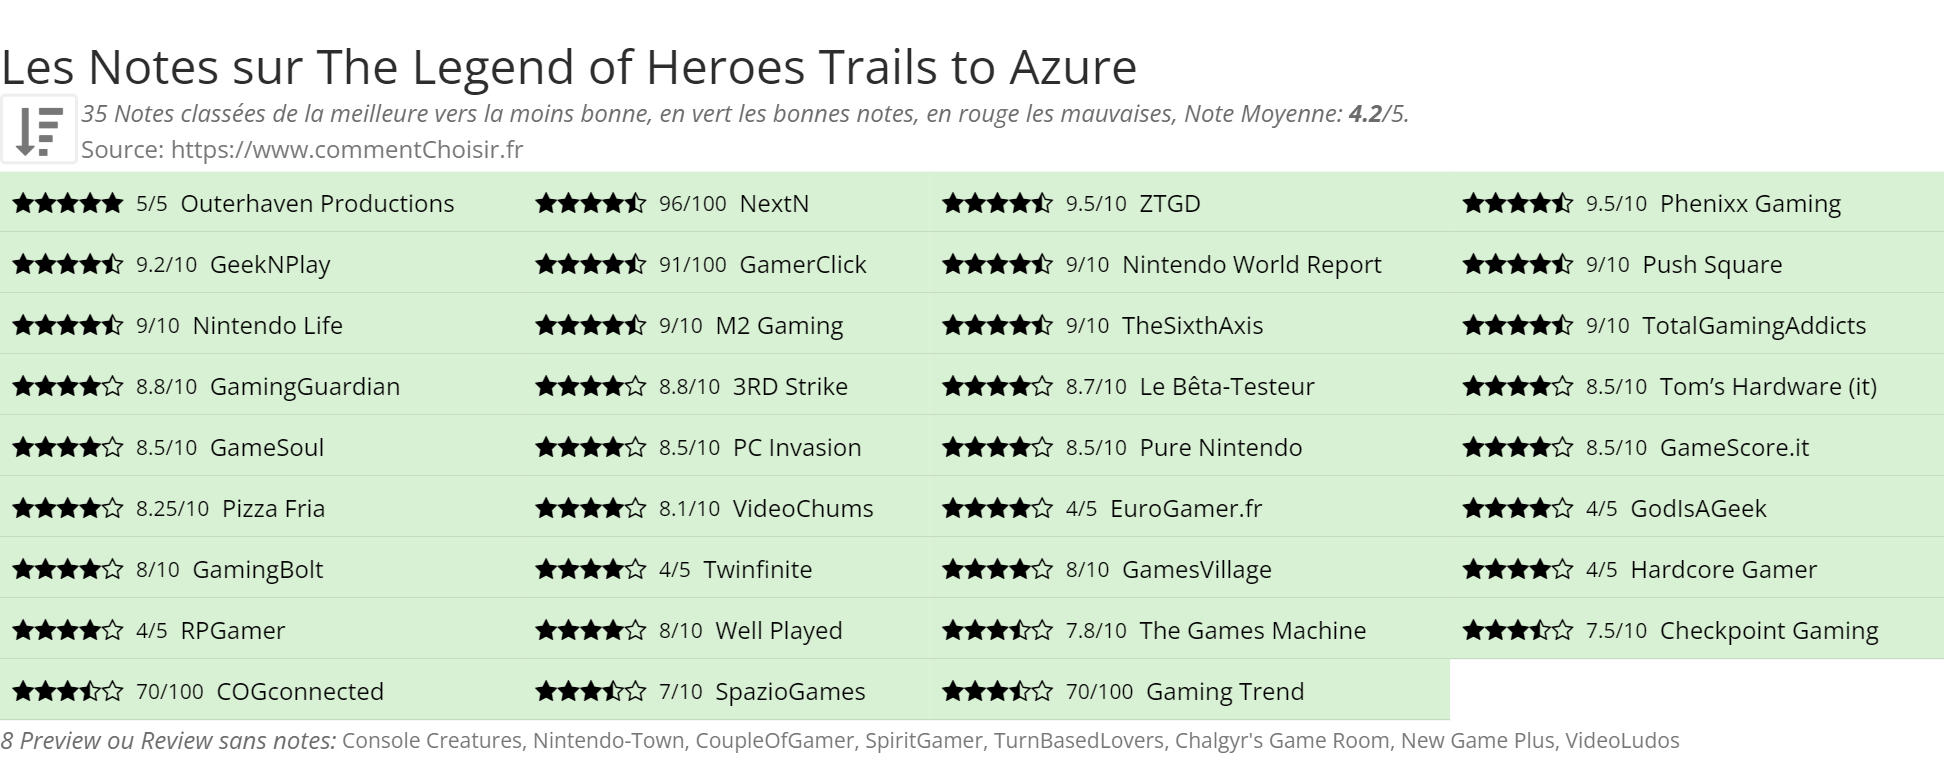 Ratings The Legend of Heroes Trails to Azure